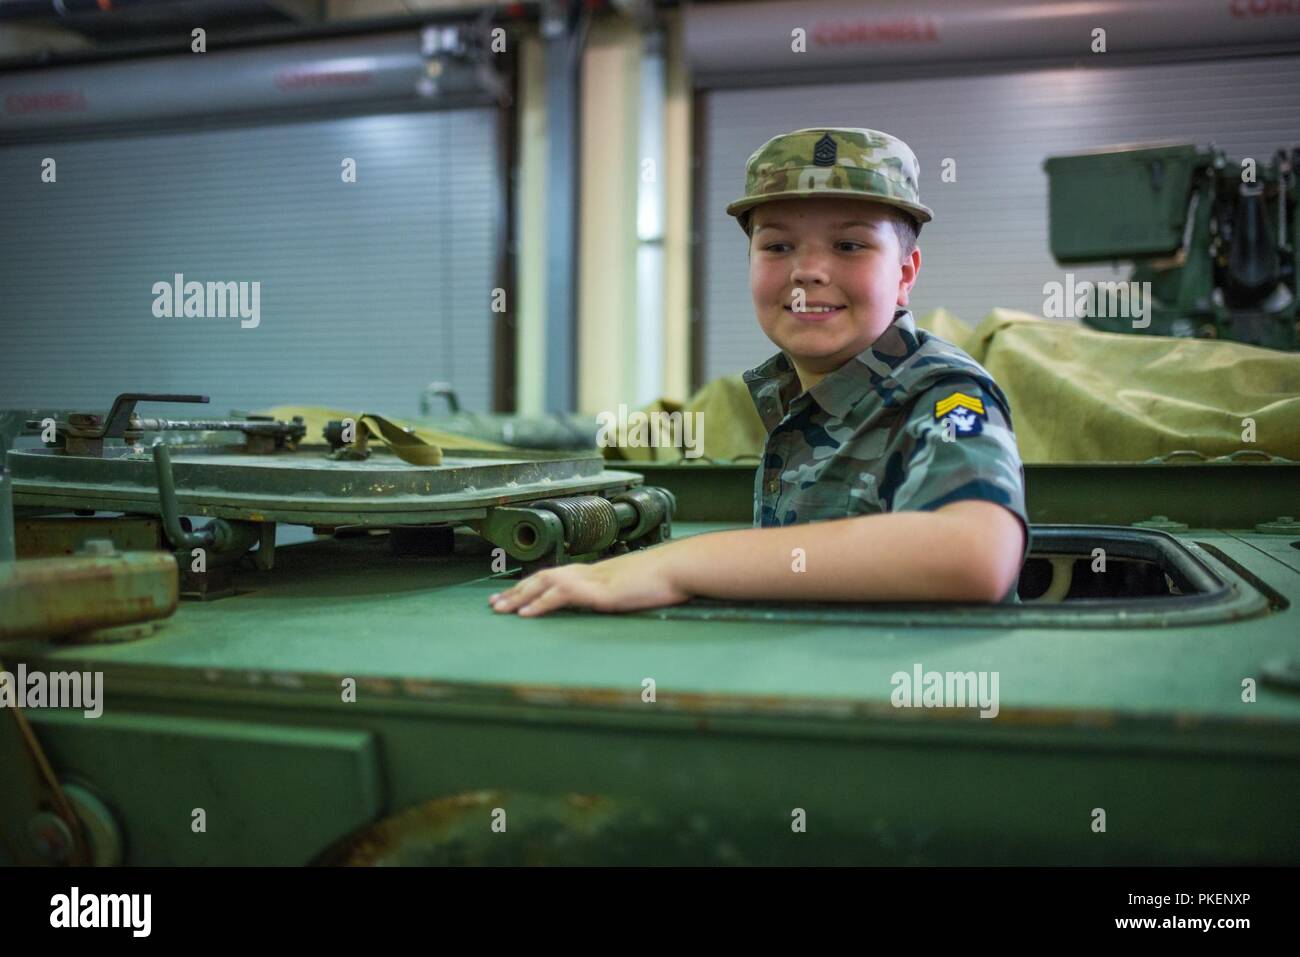 FORT BENNING, Ga. (July 30, 2018) – Nine-year-old military enthusiast Eli Wilson visited locations throughout Fort Benning, Georgia, July 26. Wilson, who has Asperger’s syndrome, ate lunch at a dining facility with Delta Company, 1st Battalion, 46th Infantry Regiment, attended a basic training graduation, visited the National Infantry Museum, and met with the 316th Cavalry Brigade to see an M1126 Stryker Combat Vehicle and an M1 Abrams Main Battle Tank. Stock Photo